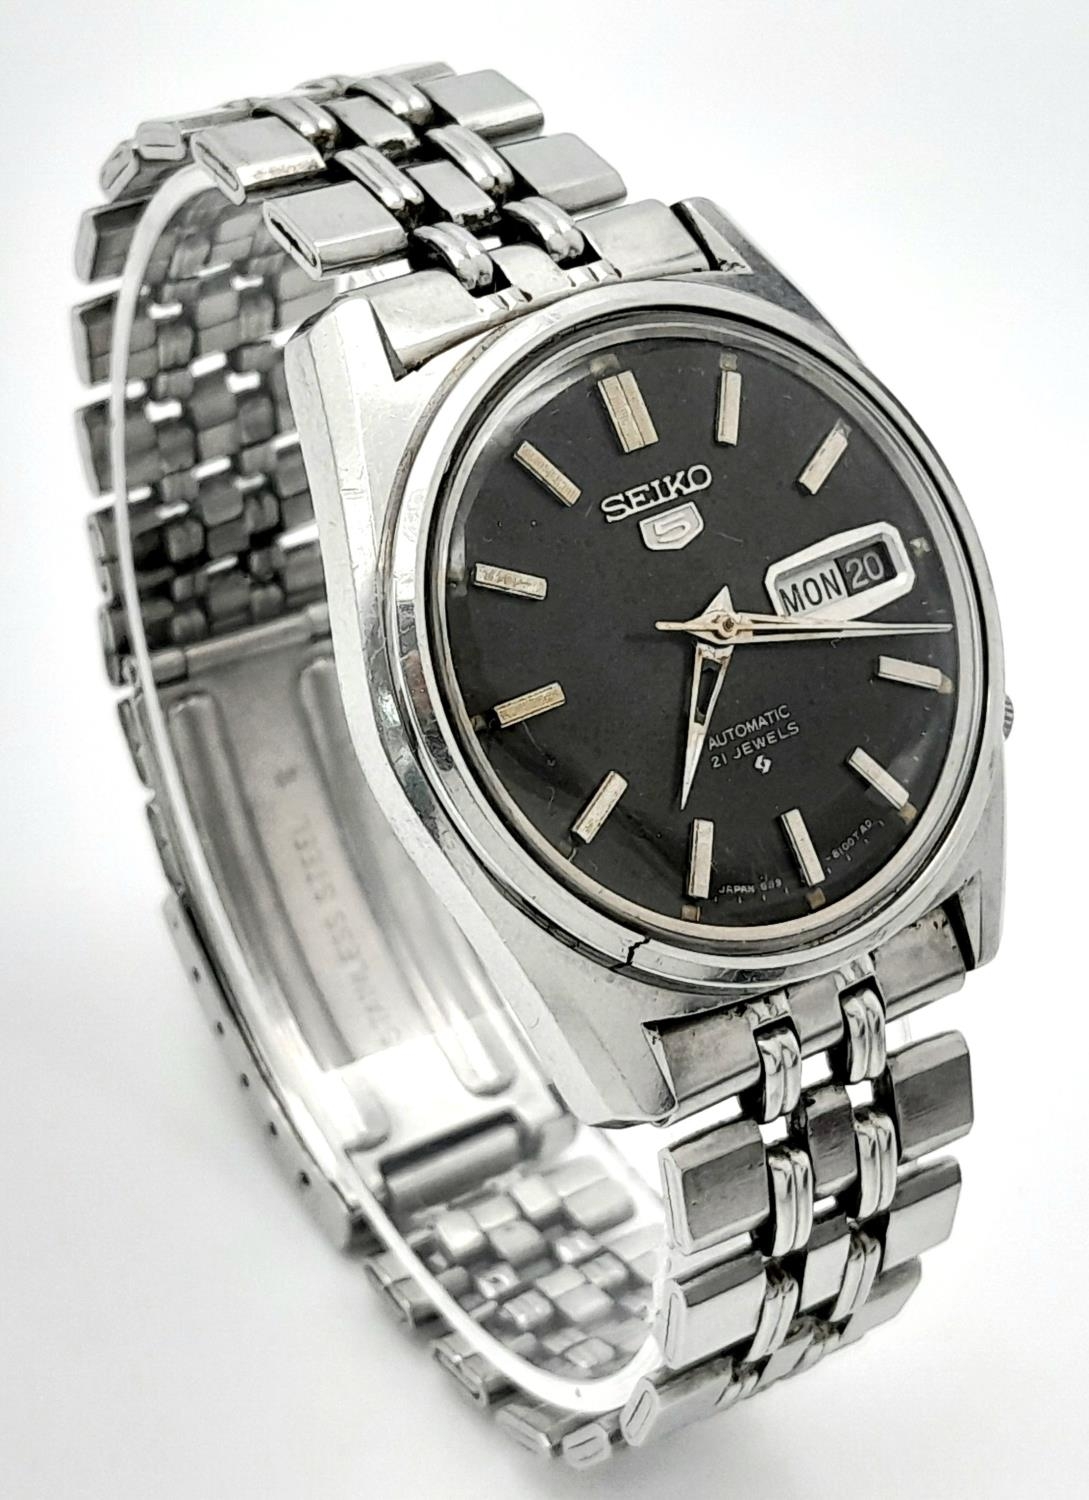 A Vintage Seiko 5 Automatic 21 Jewels Gents Watch. Stainless steel bracelet and case - 36mm. Black - Image 3 of 6